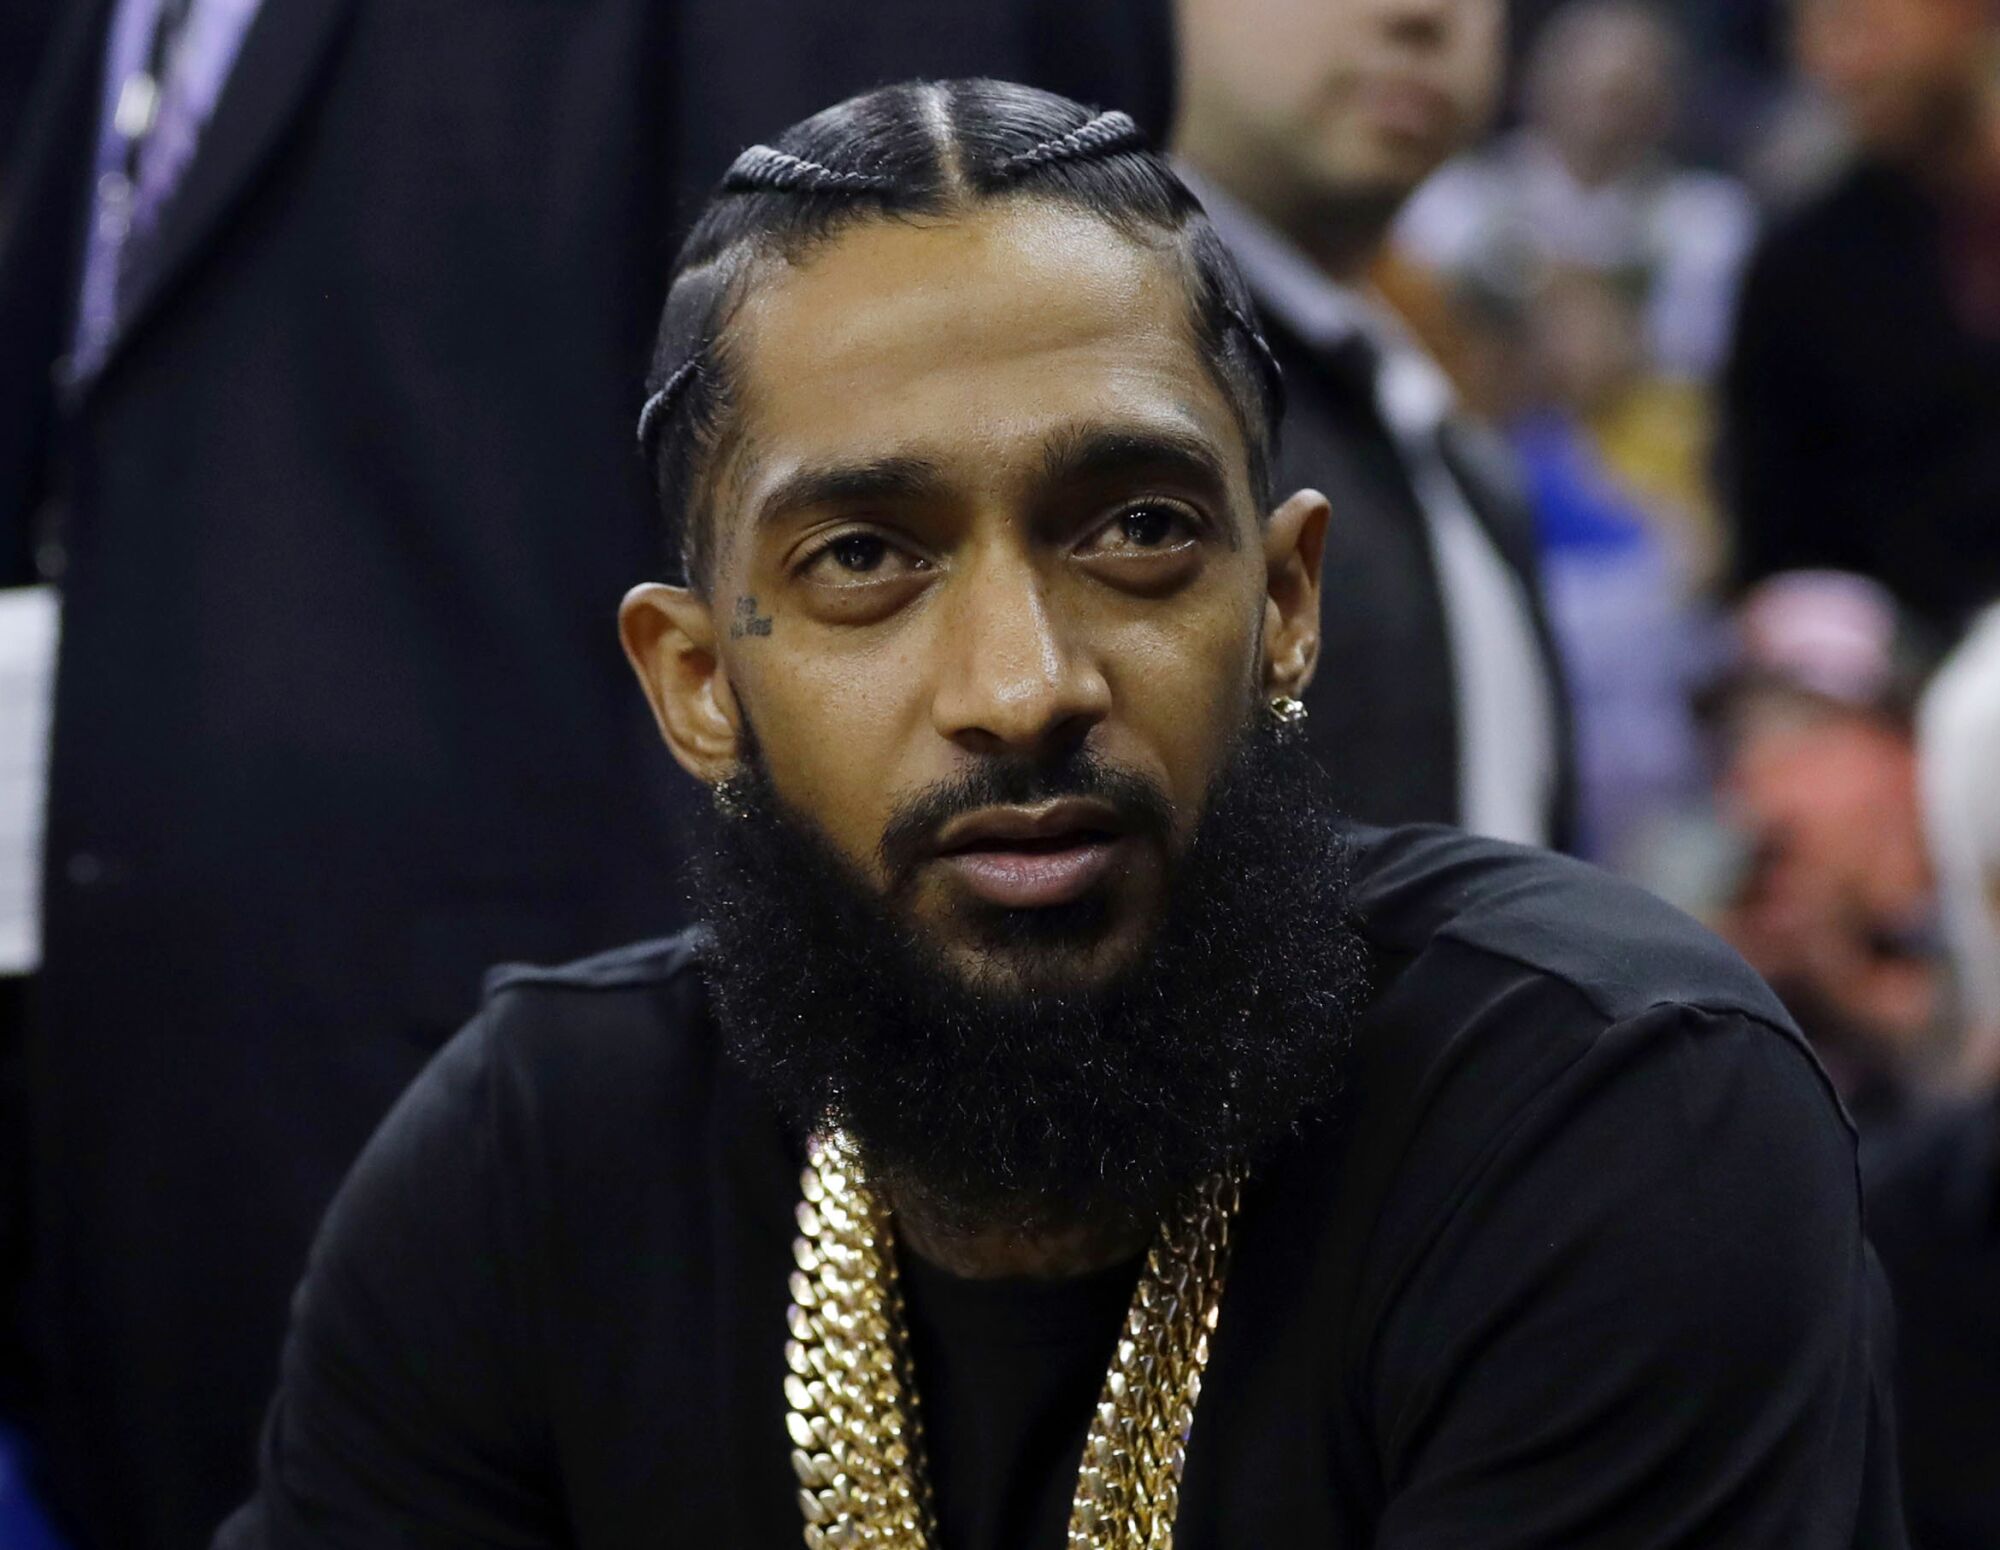 Nipsey Hussle at an NBA game in Oakland in 2018.